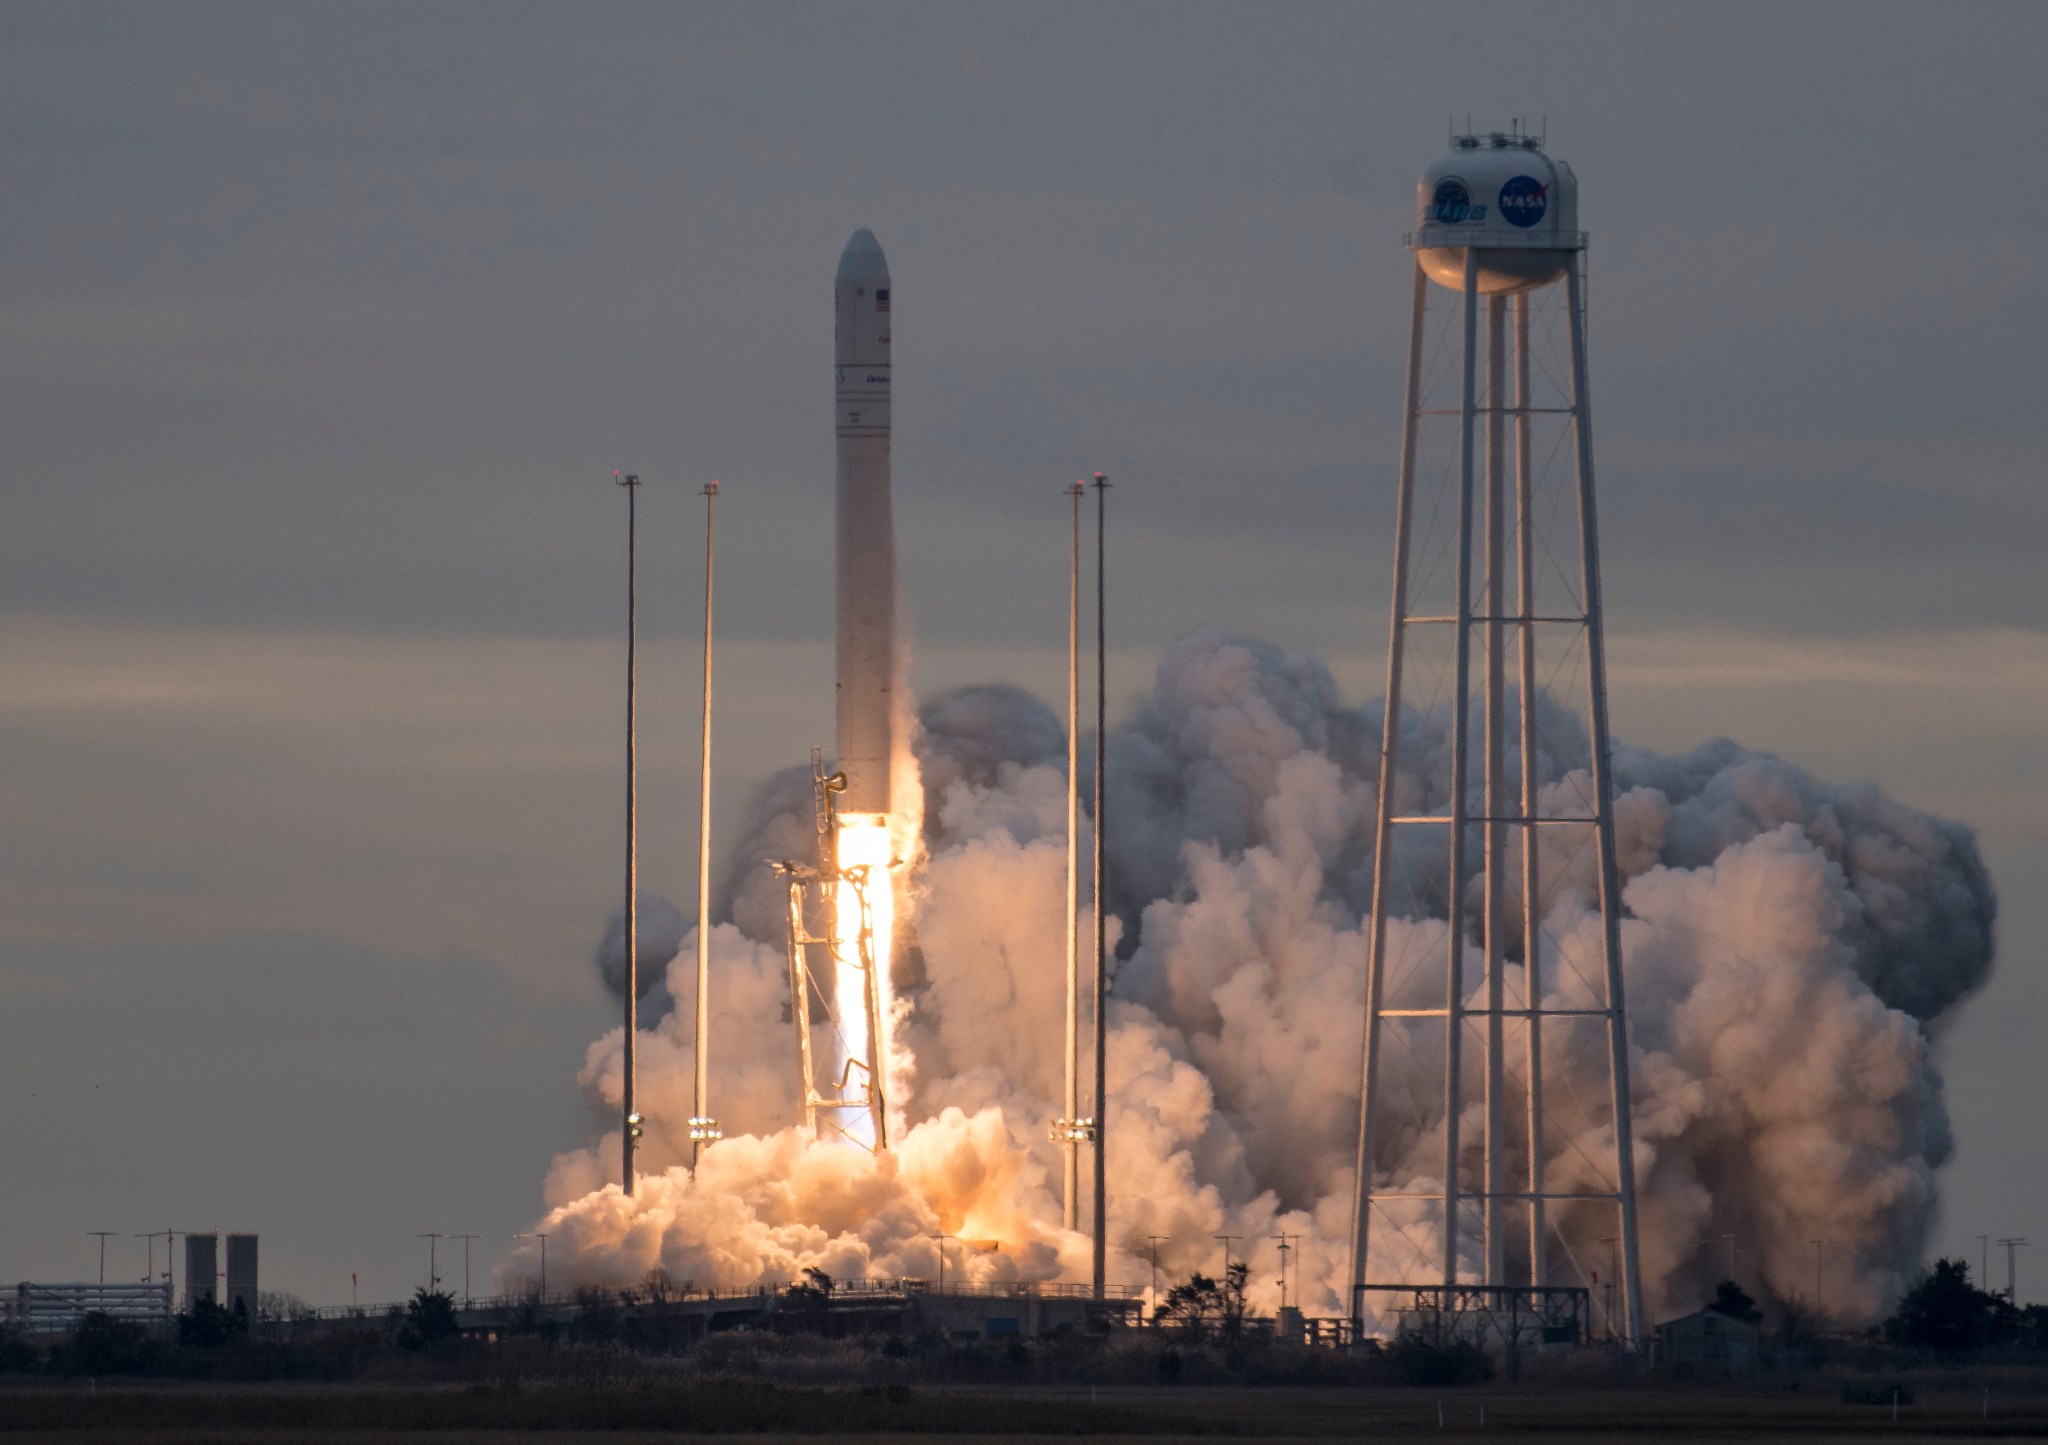 Orbital ATK's Cygnus spacecraft launched on its eighth contracted cargo resupply mission to the International Space Station Sund